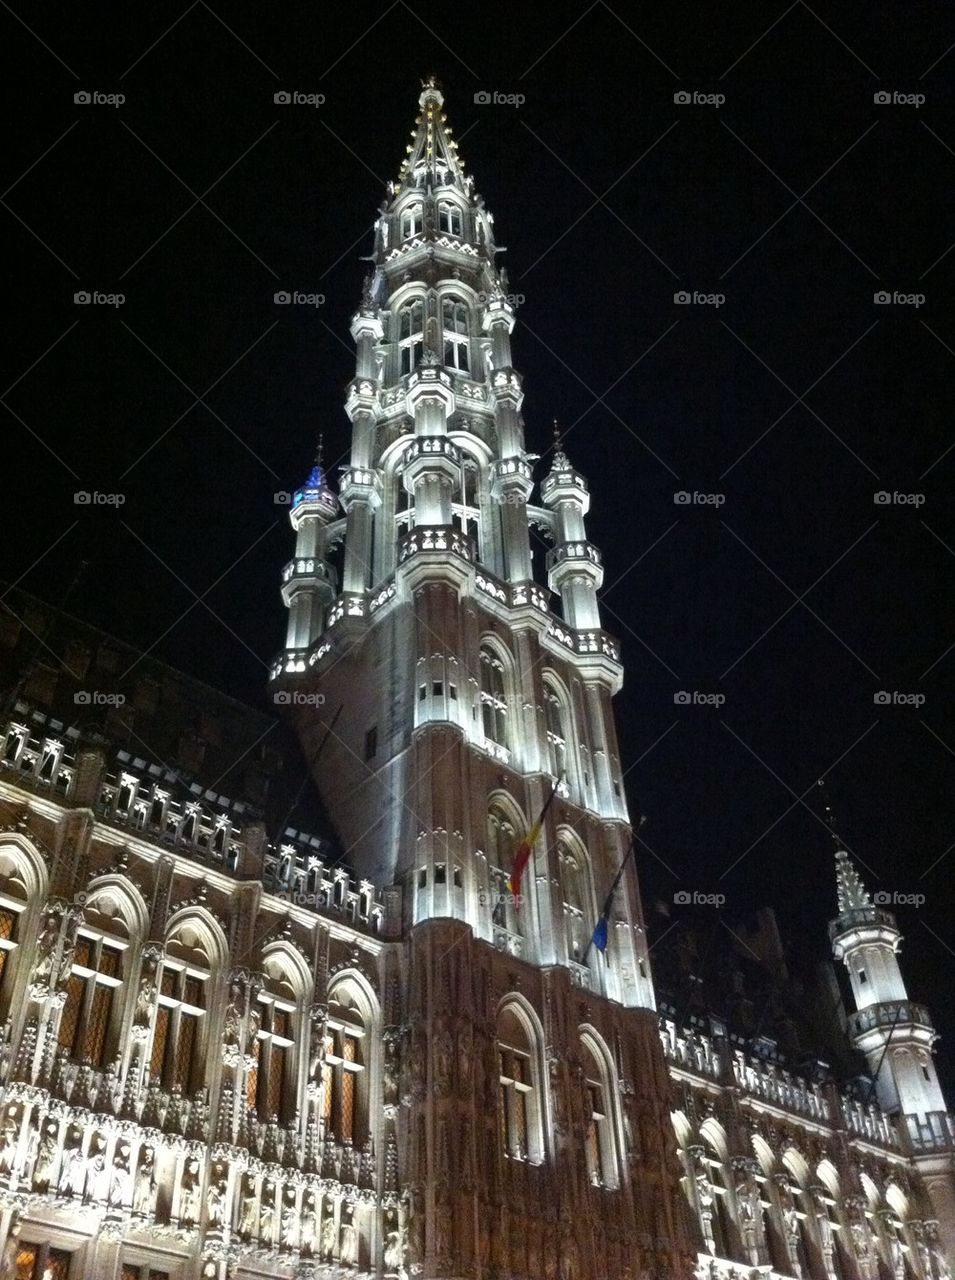 

Brussels city hall at night